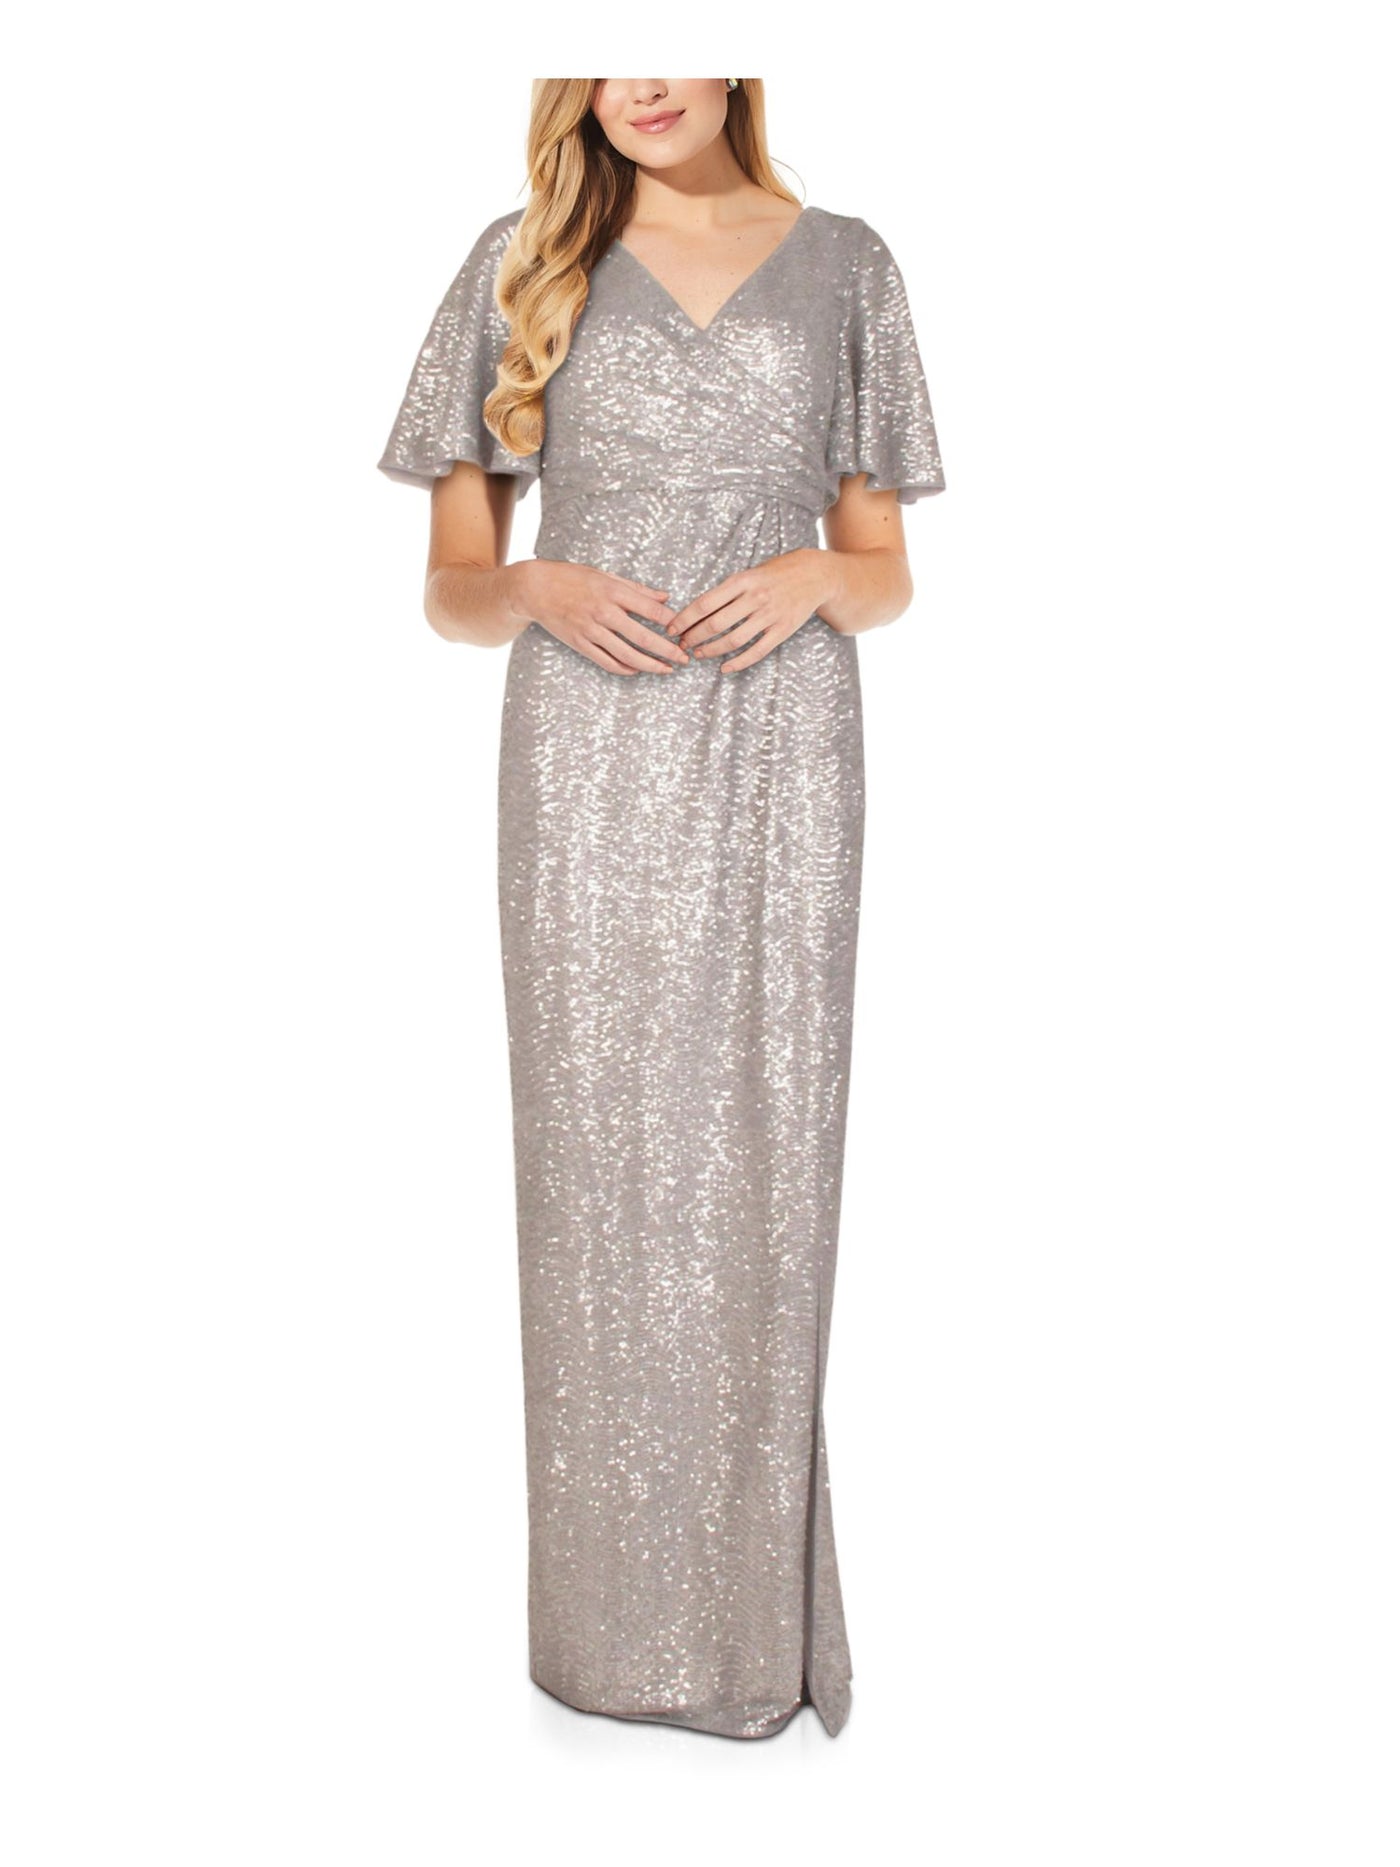 ADRIANNA PAPELL Womens Silver Zippered Sequined Flutter Sleeve Surplice Neckline Maxi Prom Faux Wrap Dress 0